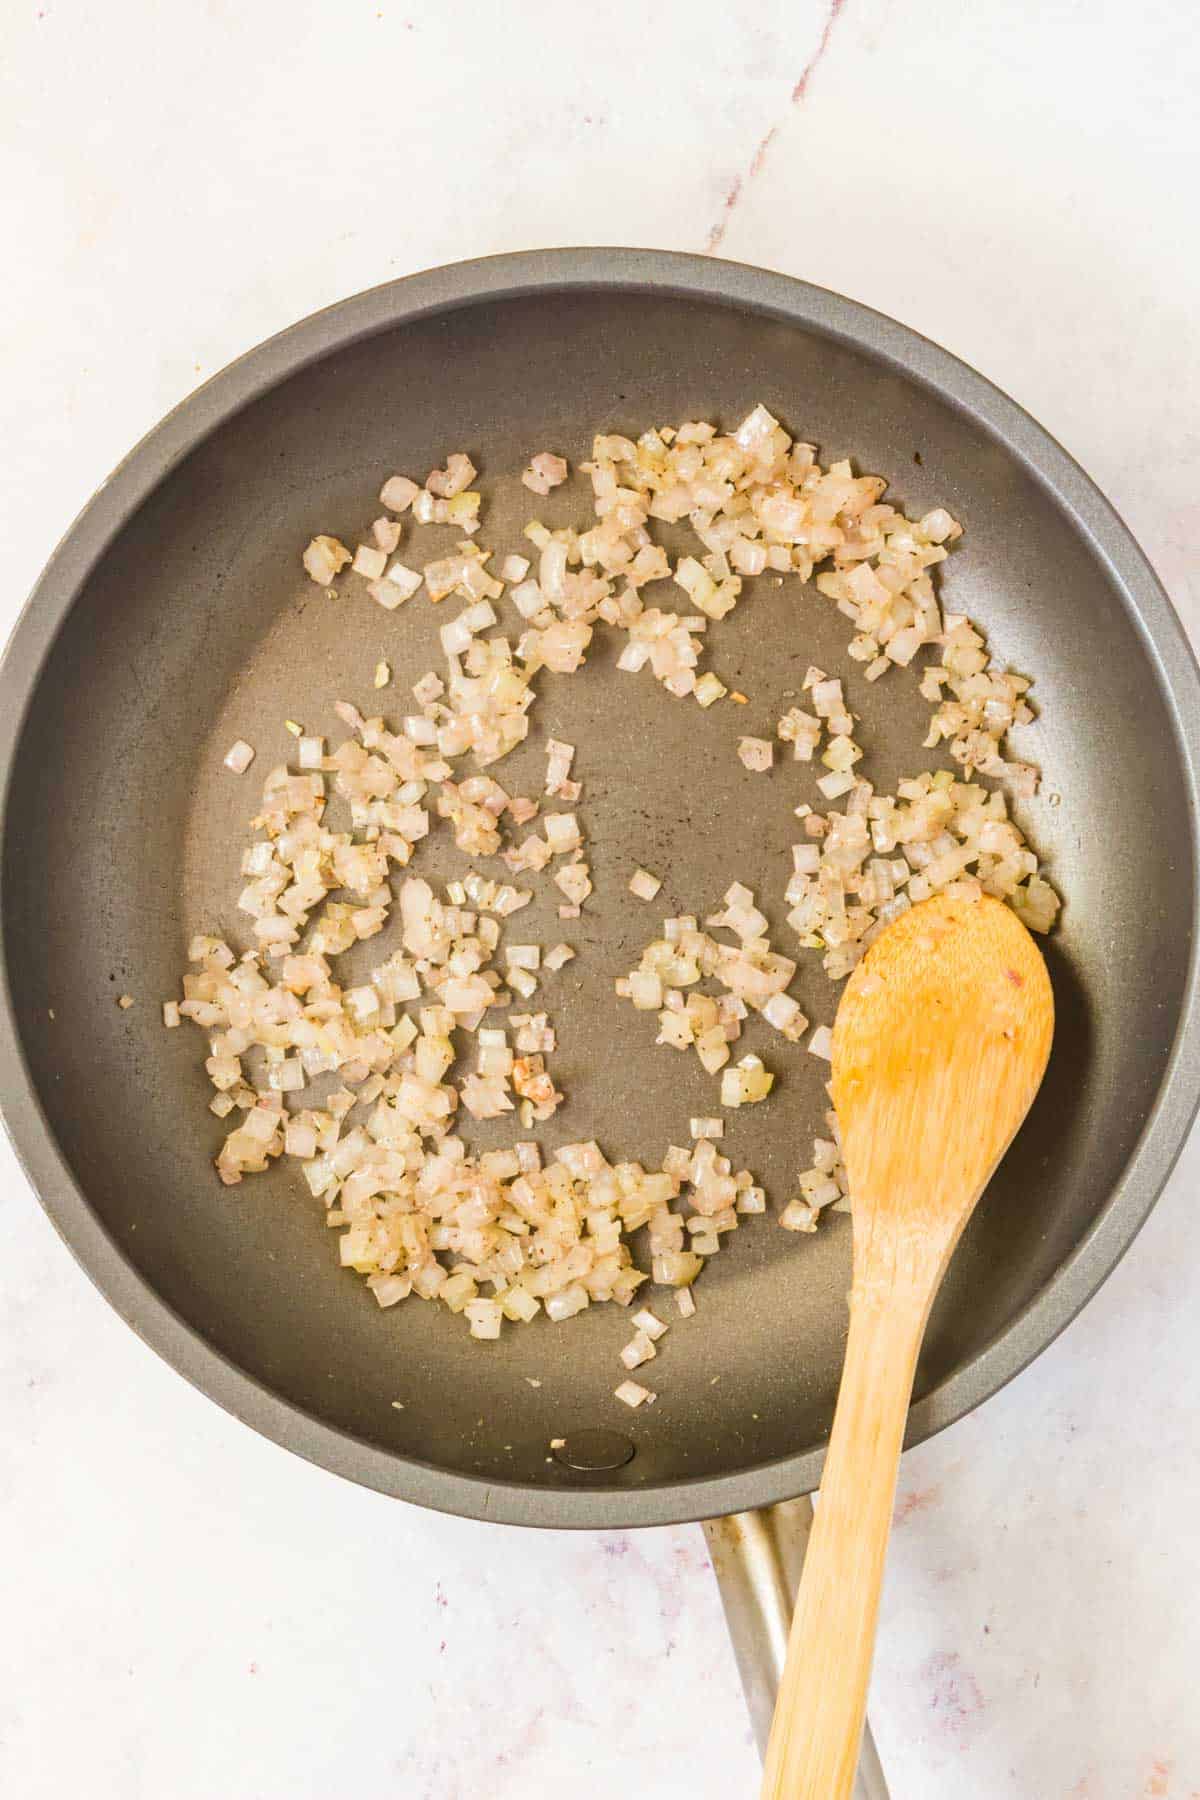 Minced shallot sauteeing in a small skillet.